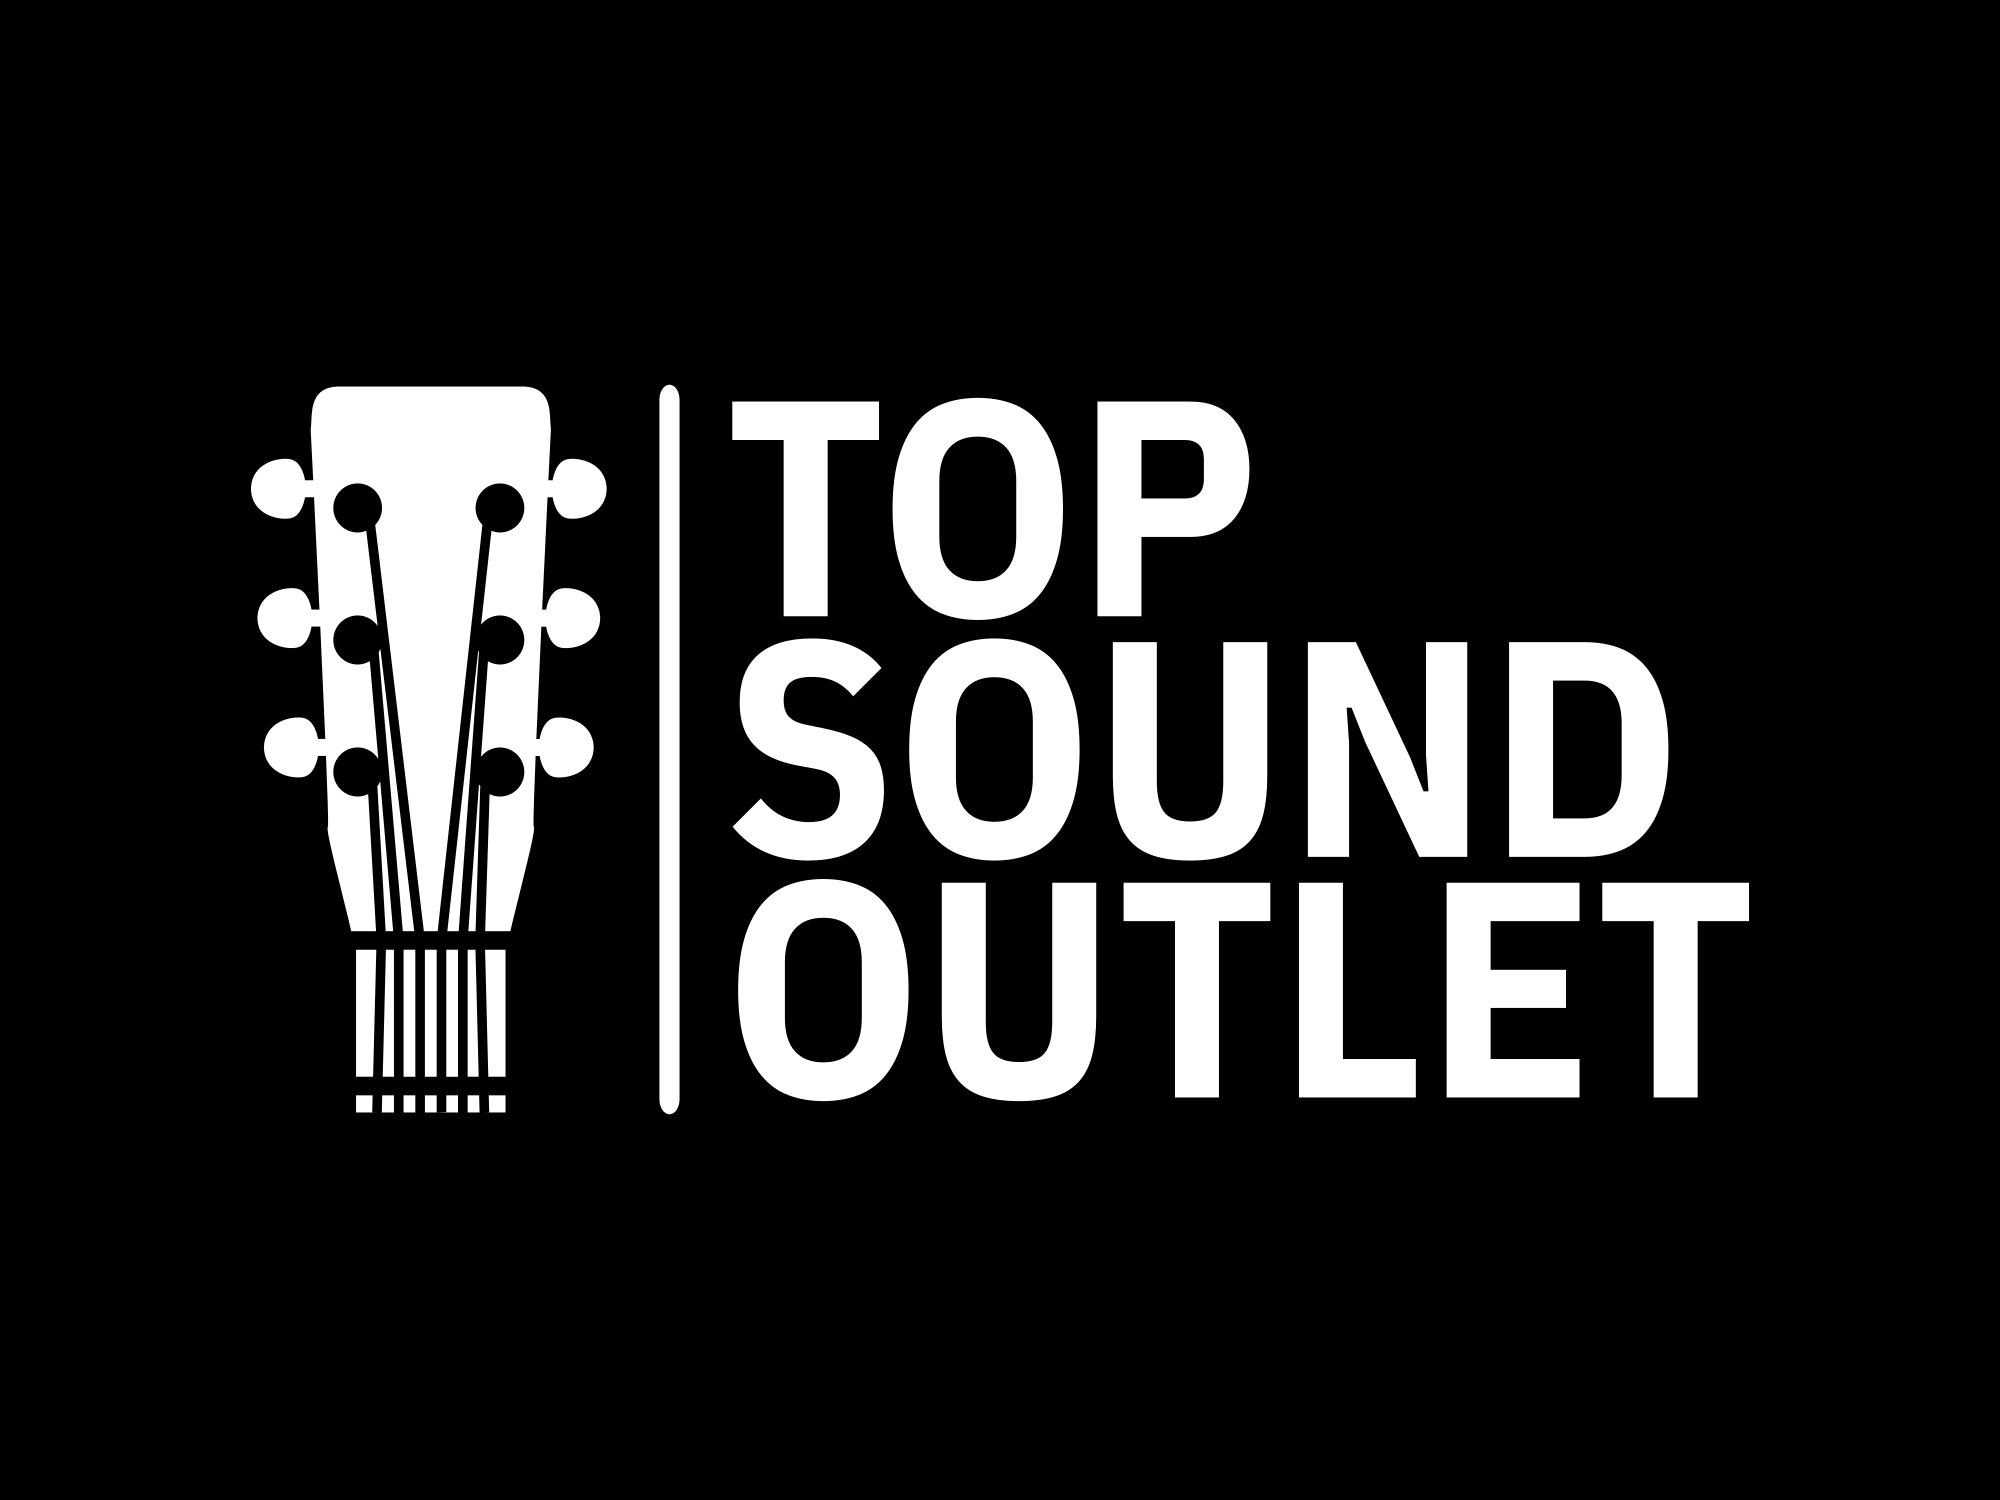 Top Sound Outlet